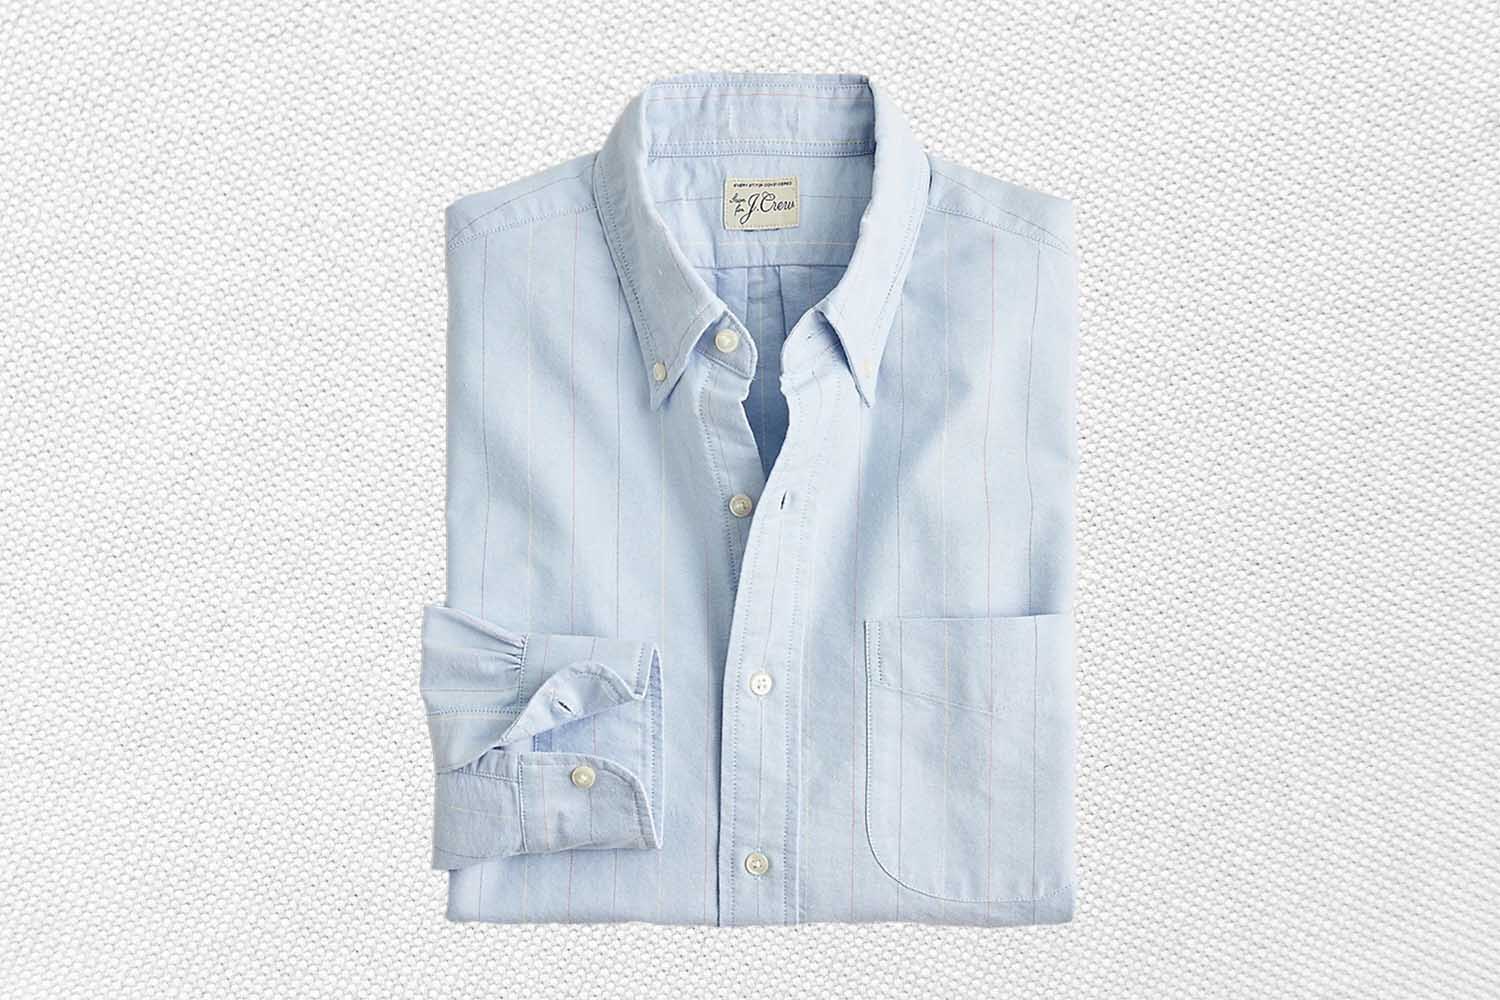 a blue oxford shirt from J.Crew on a grey background